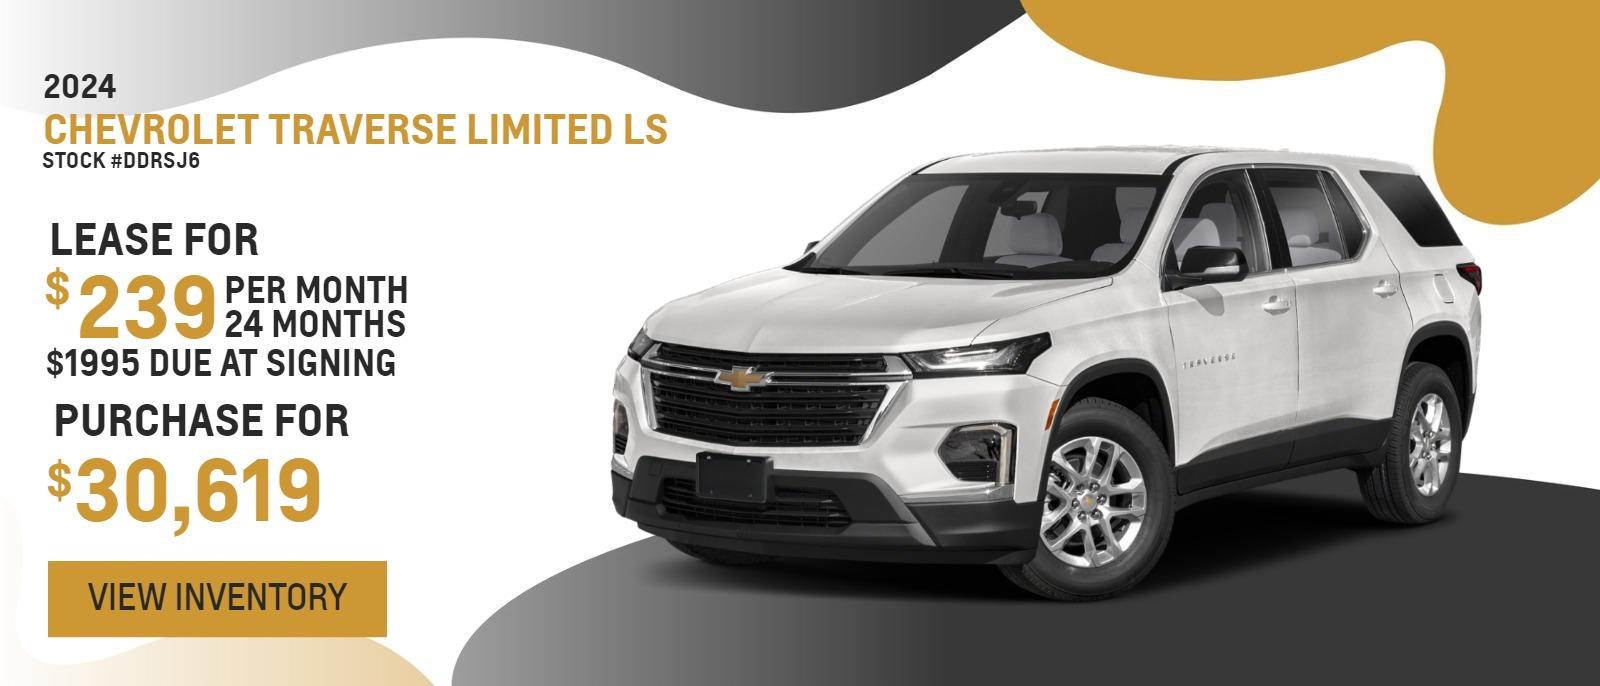 2024 Traverse Limited LS
Stock# DDRSJ6
Lease for $239 per month, 24 months, $1995 down
Purchase for $30,619